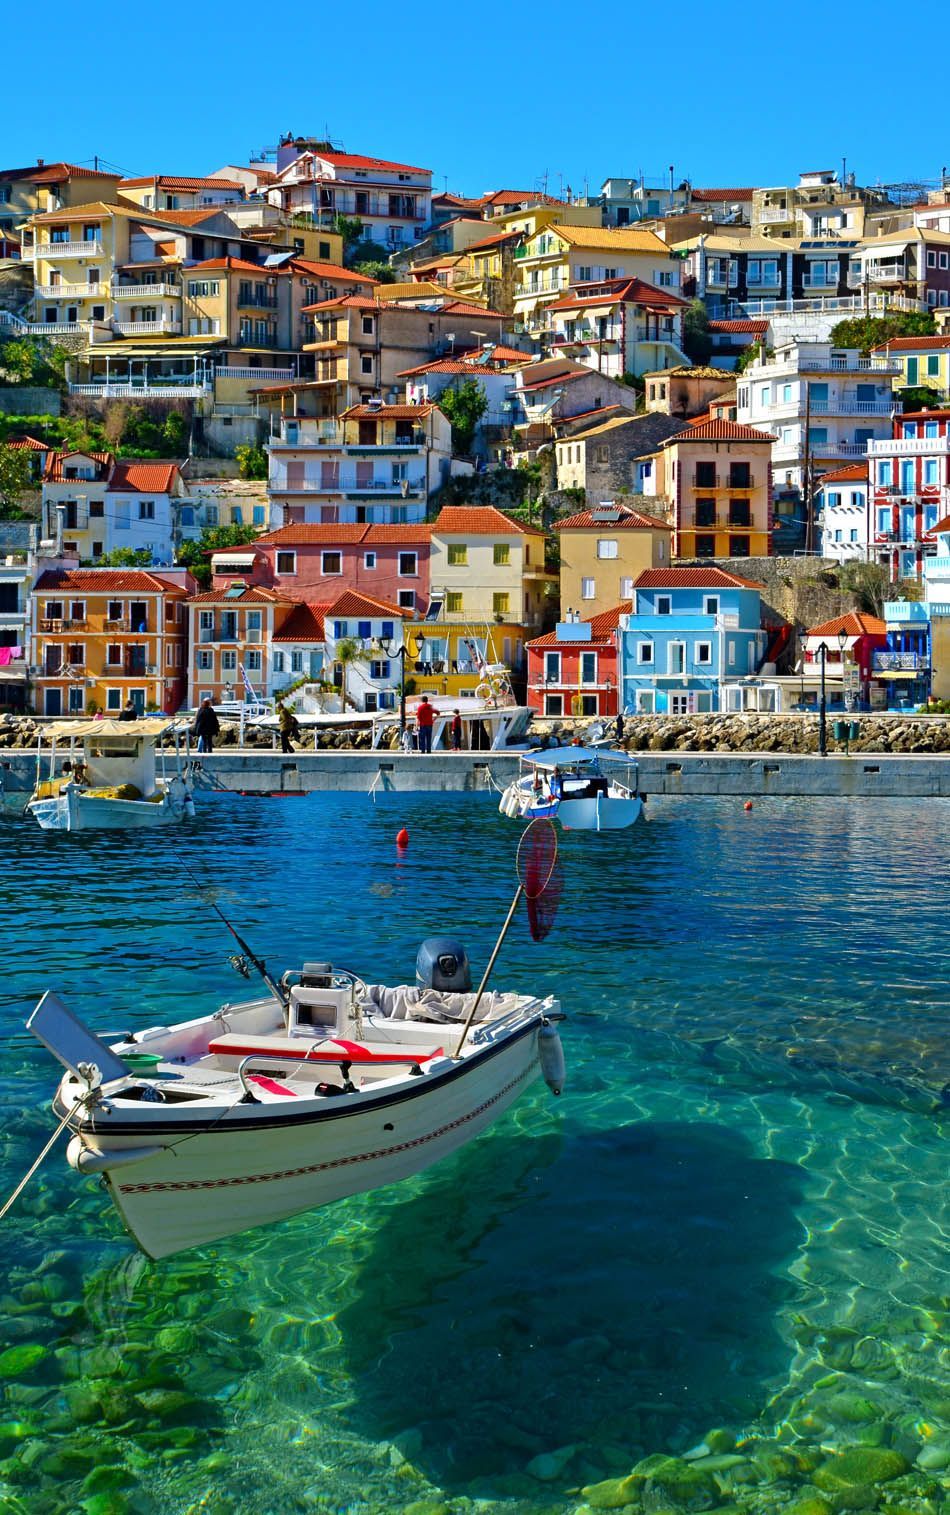 Colorful boat in Parga, Greece | 25 Gorgeous Pictures Of Greece That Will Take Your Breath Away